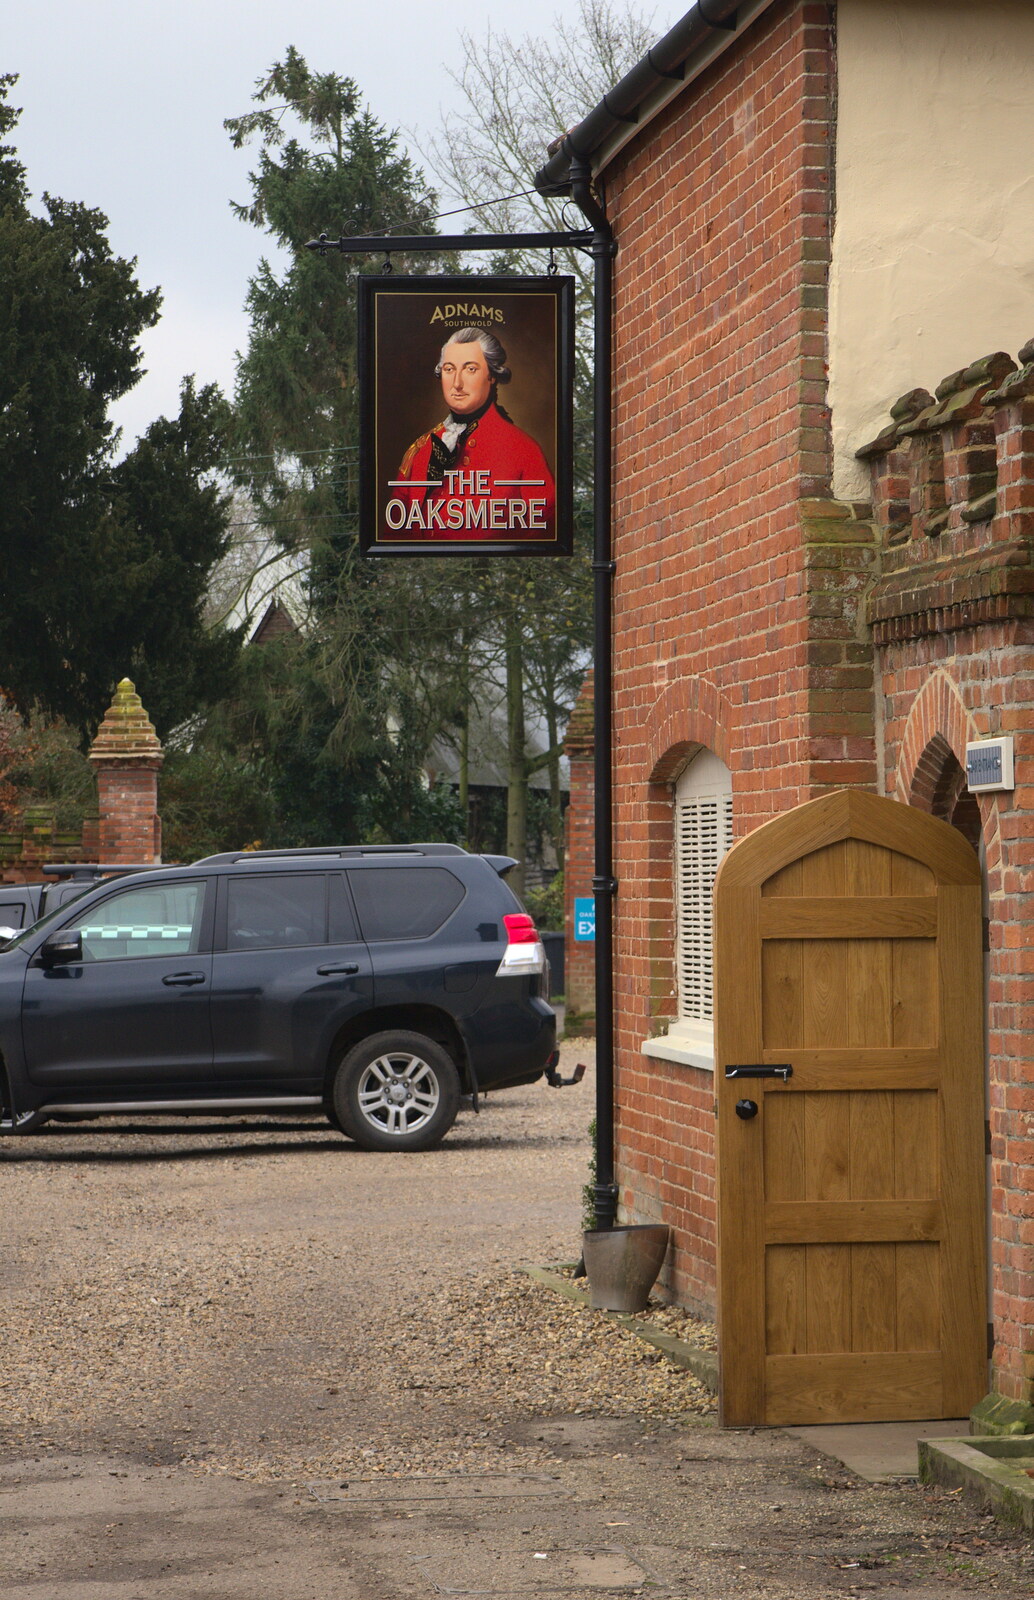 The Oaksmere gets a new sign with Cornwallis on it from The Lorry-Eating Pavement of Diss, Norfolk - 3rd December